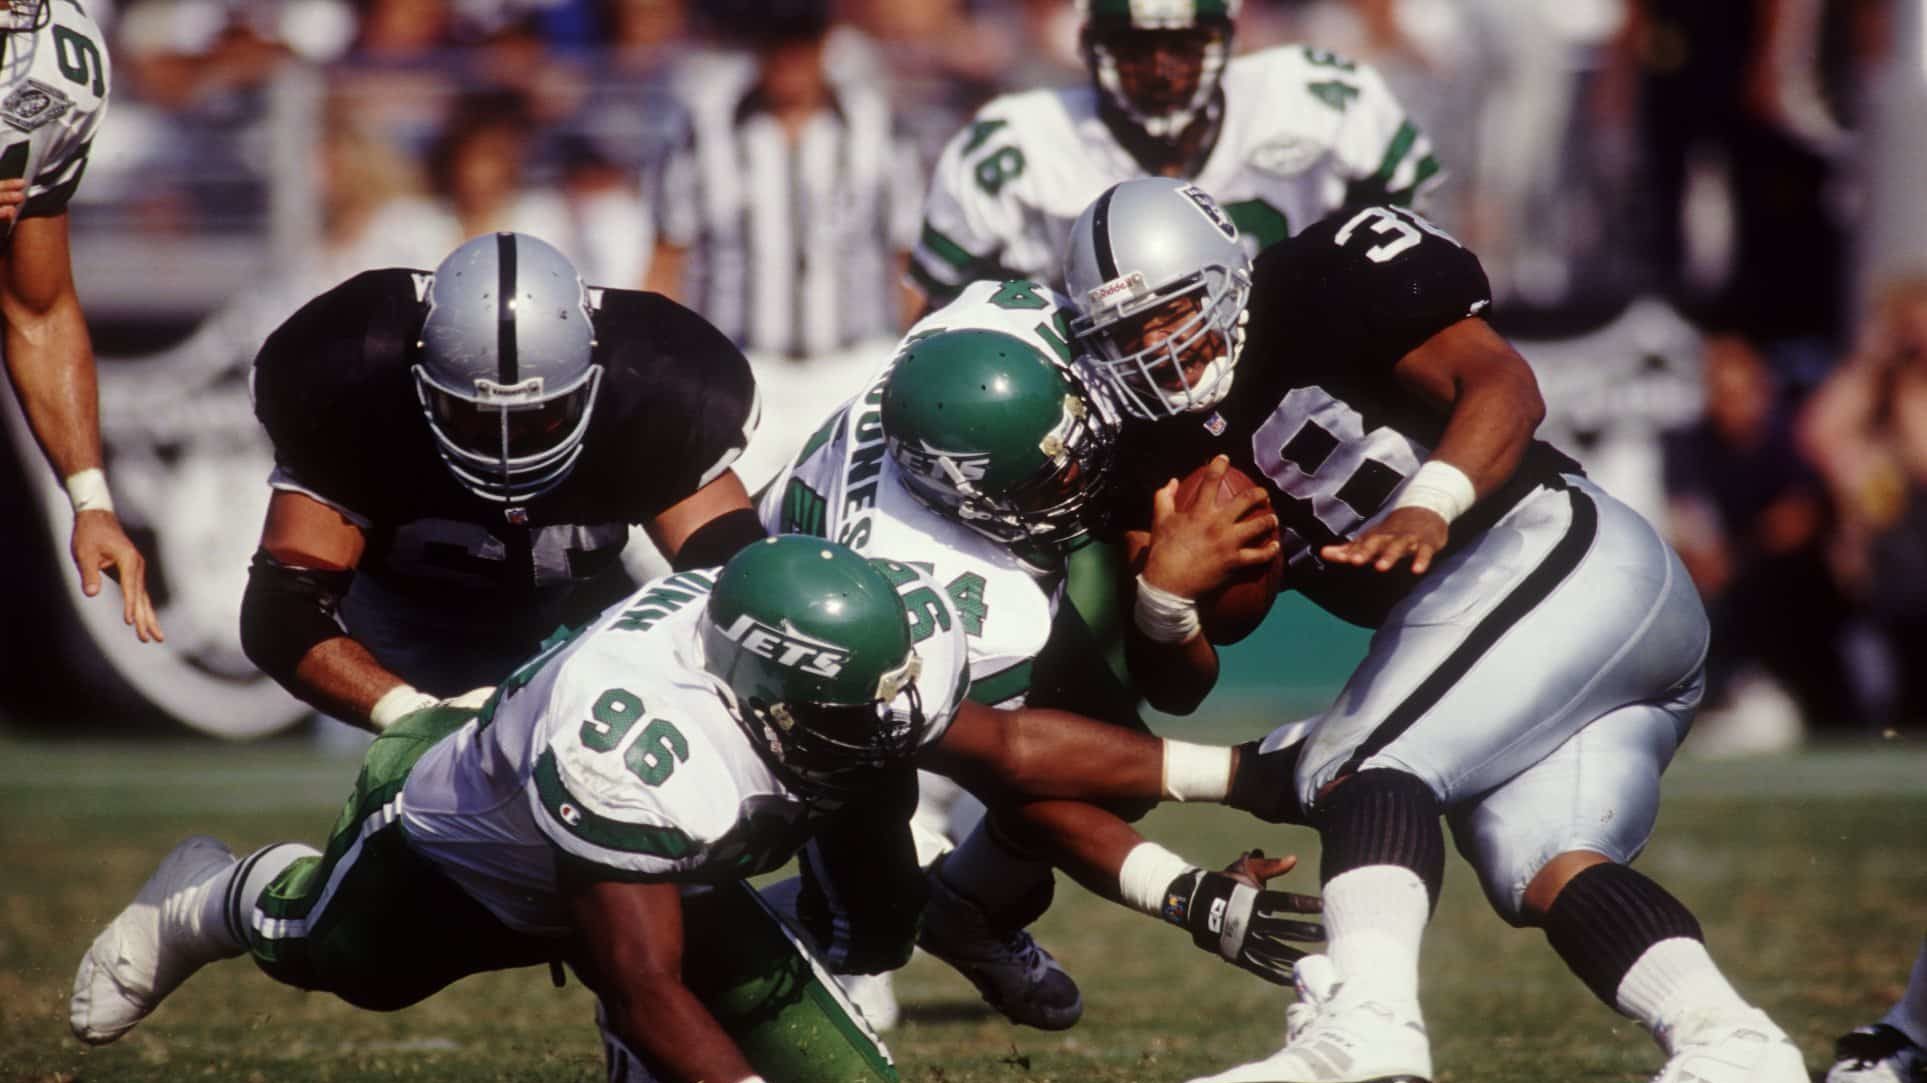 The Los Angeles Raiders Nick Bell is hit by Mark Gunn (96) and Marvin Jones (54) of the New York Jets.